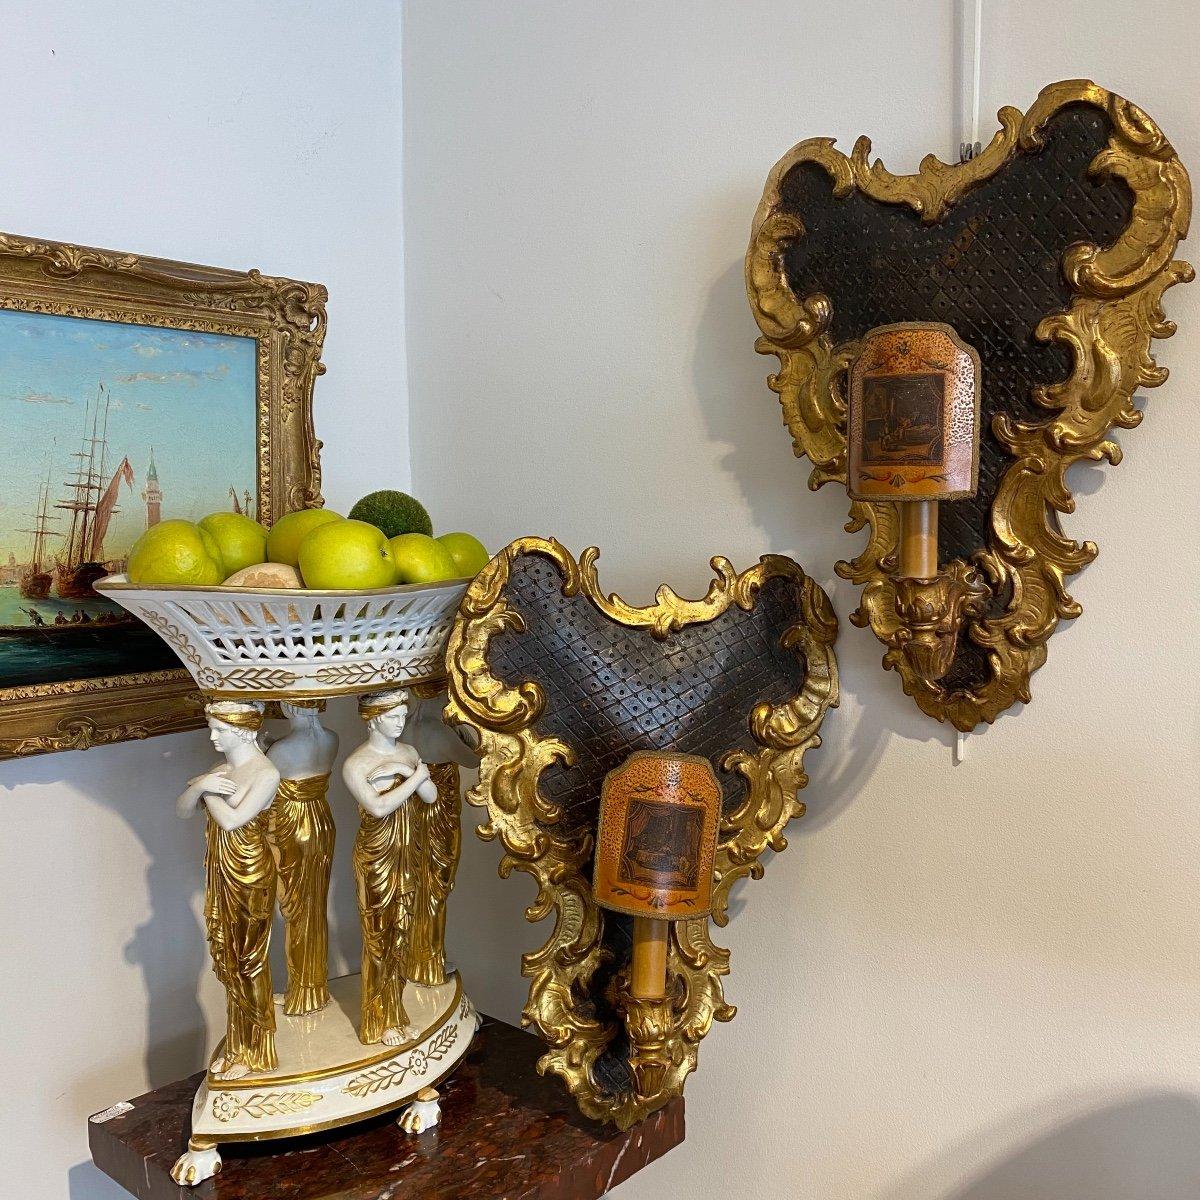 We present you this splendid pair of rare single-light, Louis XV Rocaille-style gilded wood wall sconces from the 18th century. They originate from Italy and are imbued with the essence of the Baroque era. The central part of these sconces has a